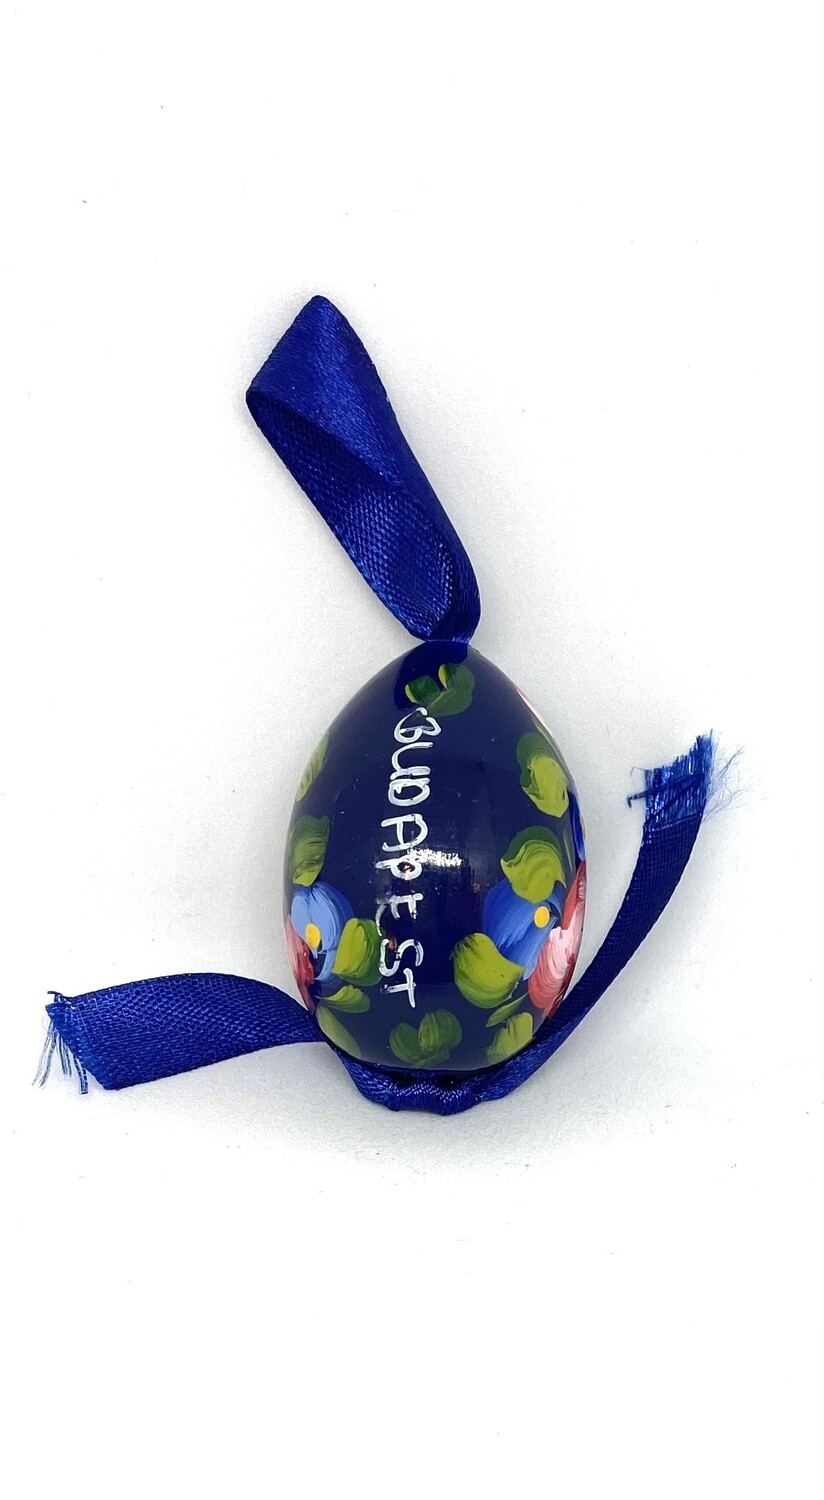 “Budapest” Painted Egg Ornament